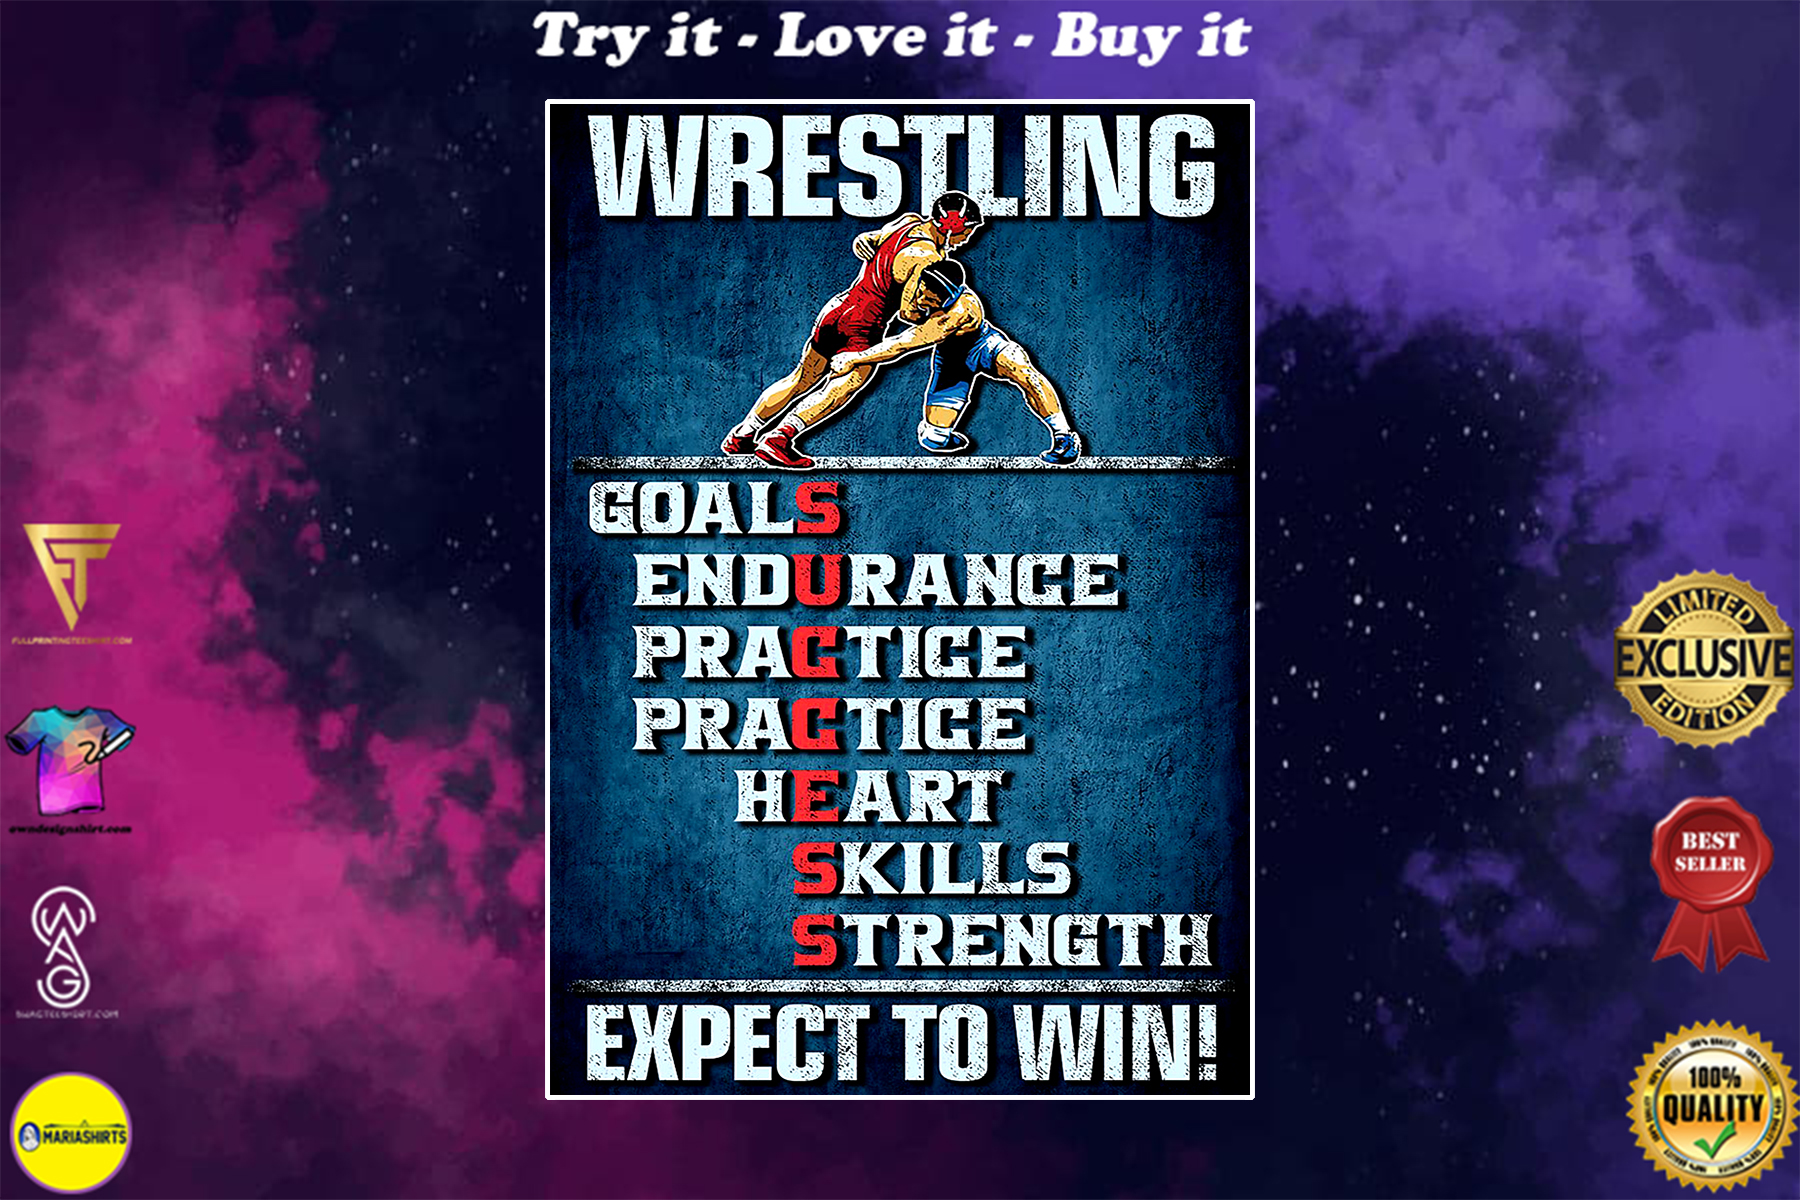 wrestling goals skills strength expect to win vintage poster